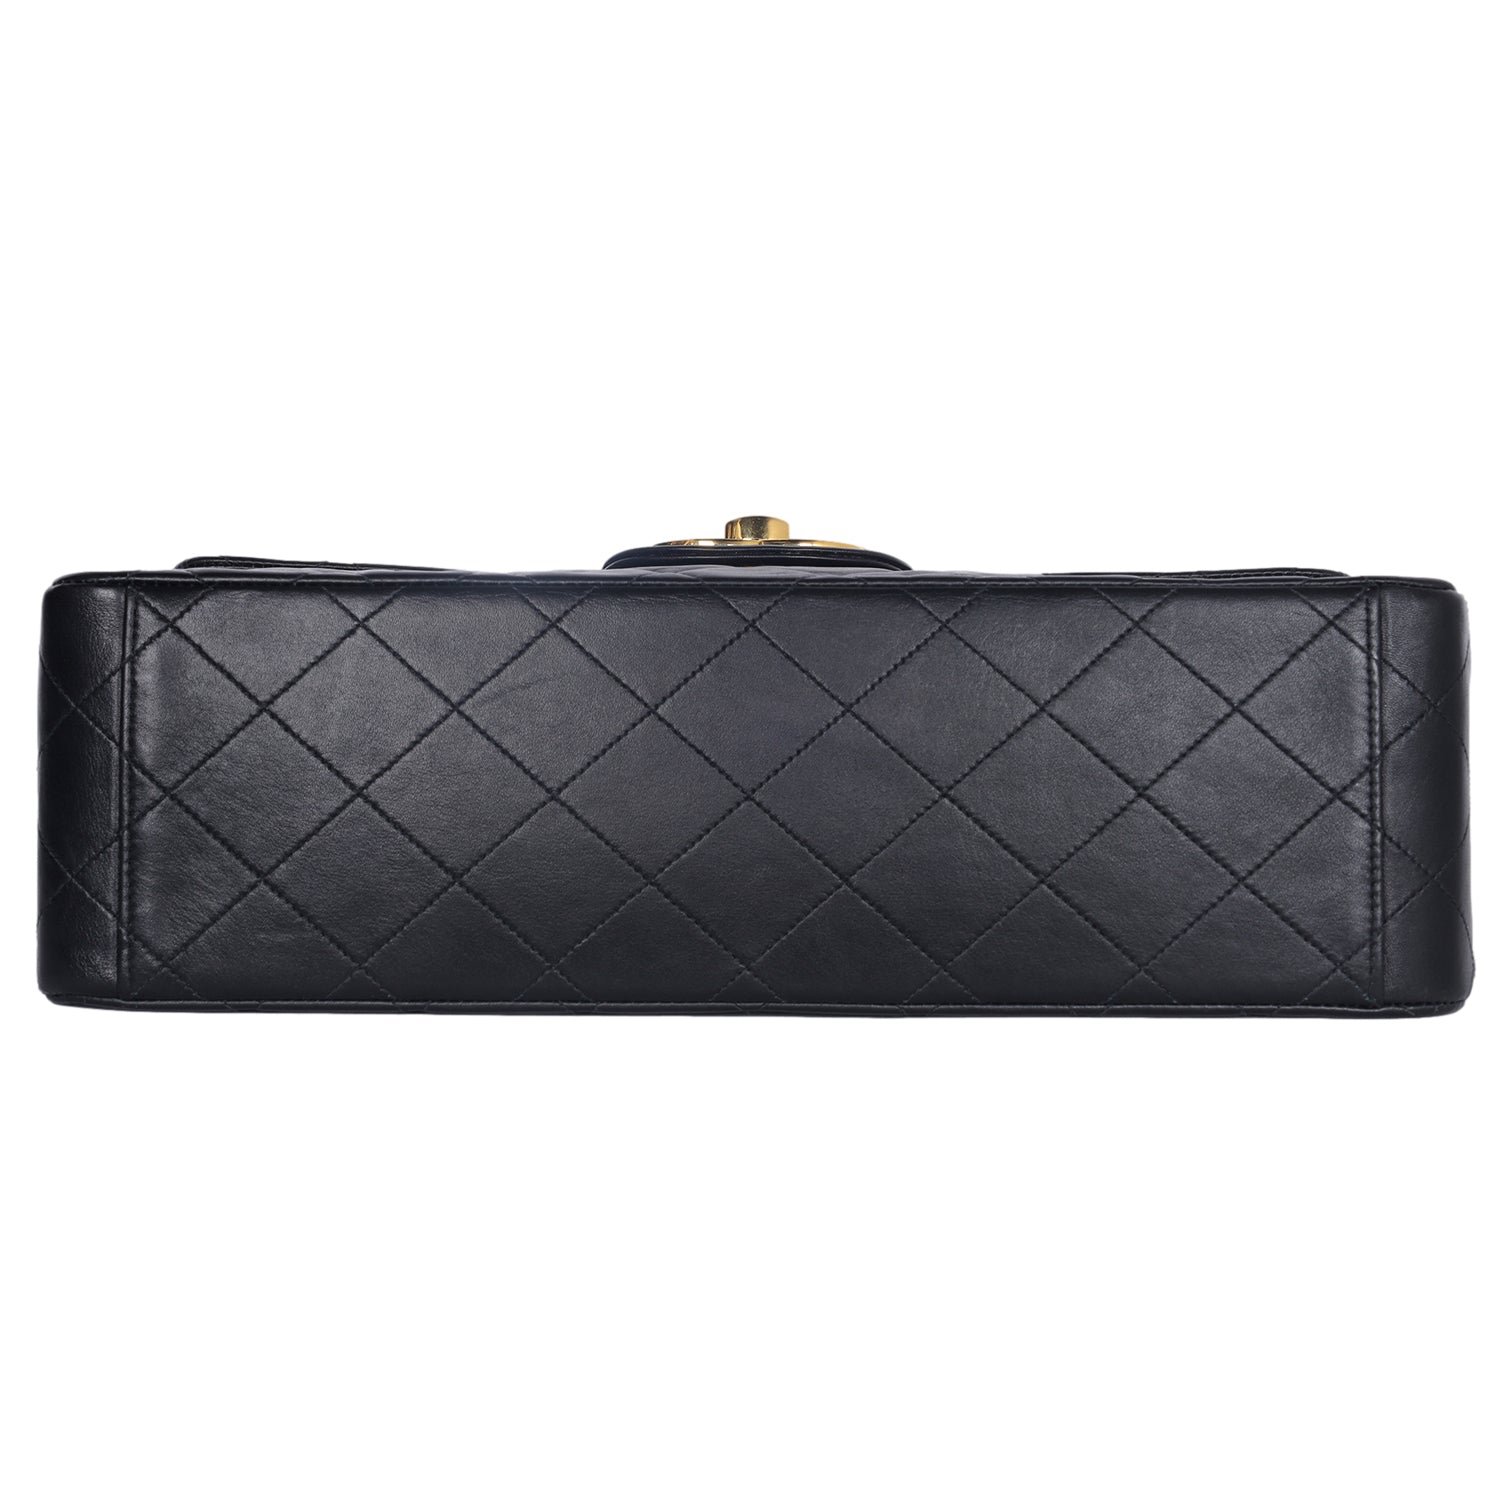 Chanel Black Leather Vintage Speedy Bag – Only Authentics